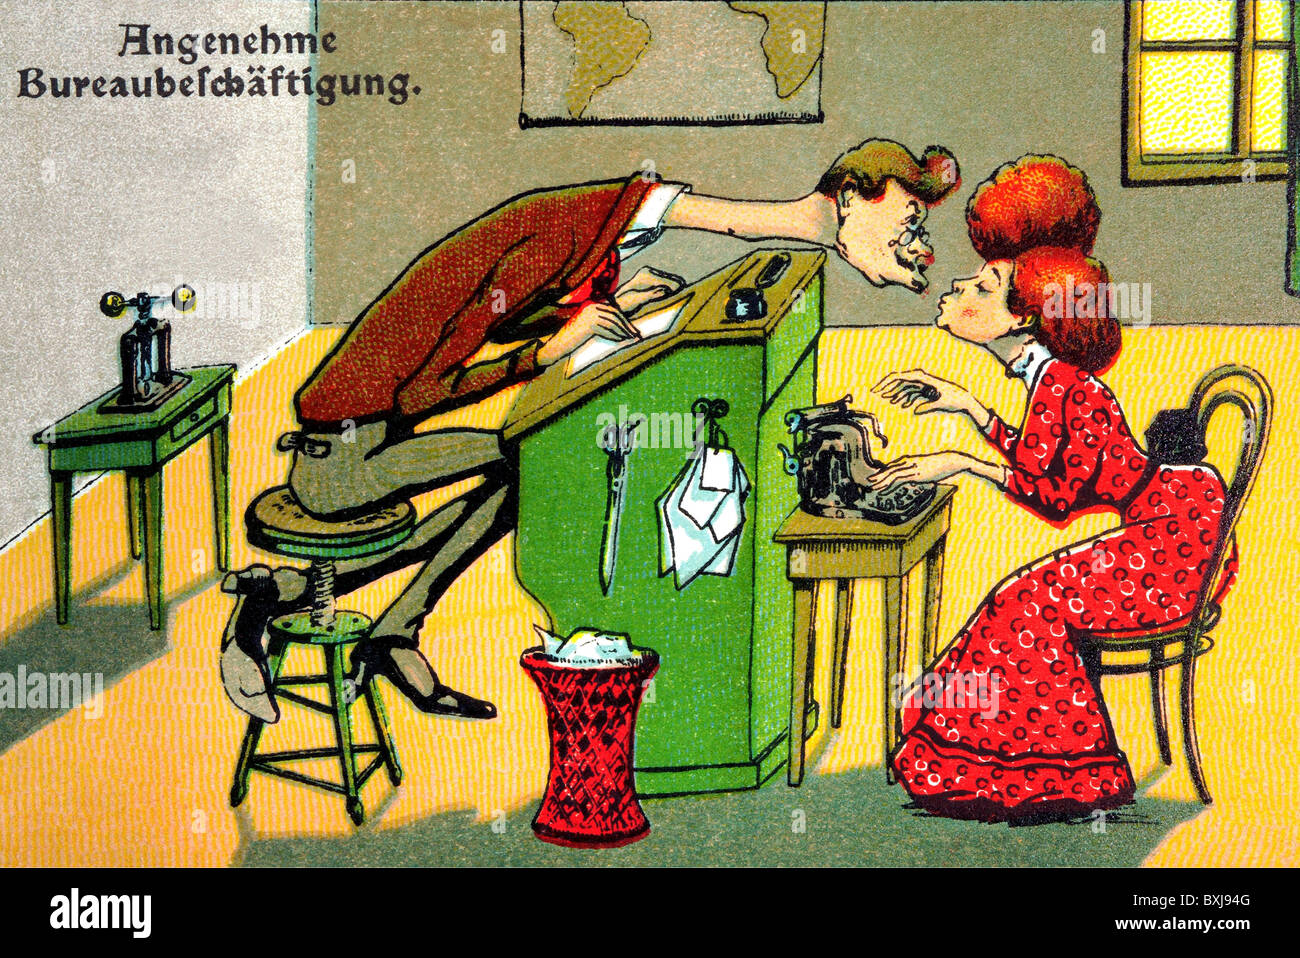 office, cartoon: secretary flirting with her boss, illustration, Germany, circa 1911, Additional-Rights-Clearences-Not Available Stock Photo